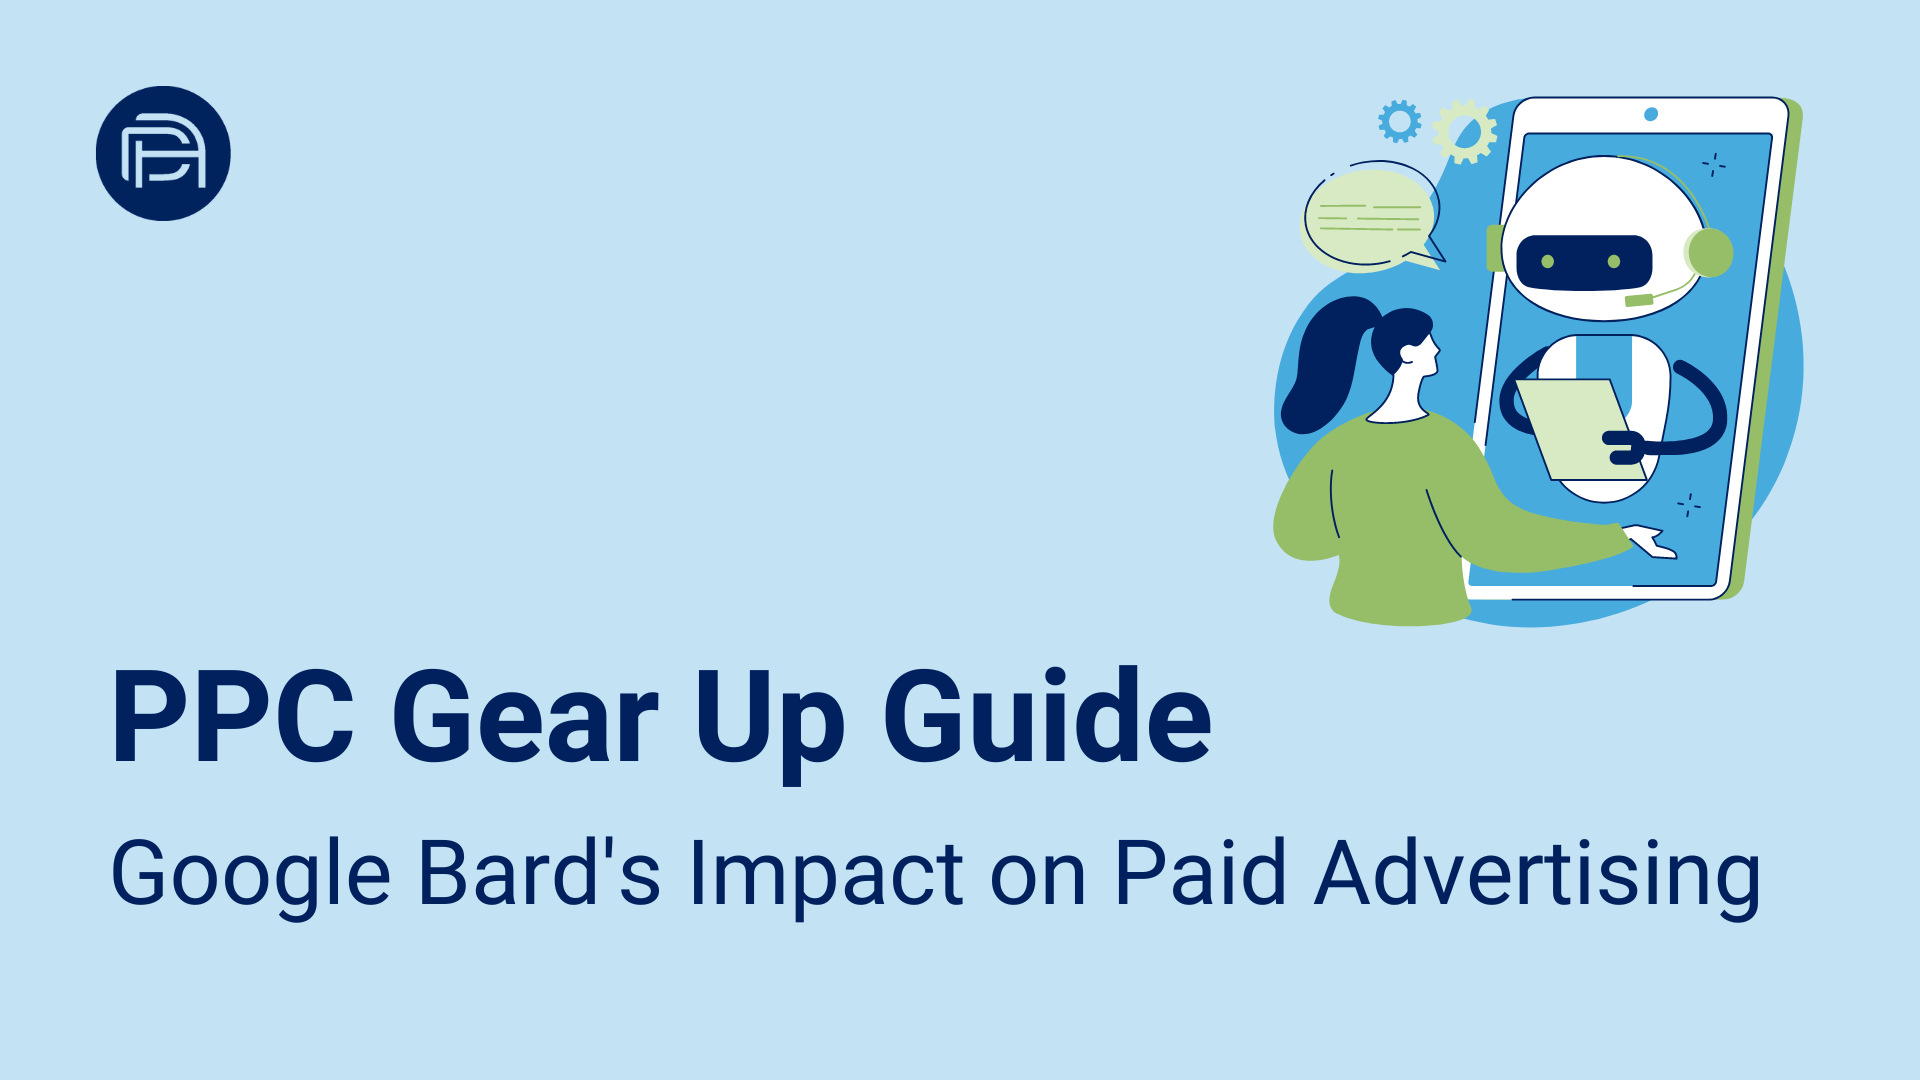 PPC Gear Up Guide: Google Bard’s Impact on Paid Advertising